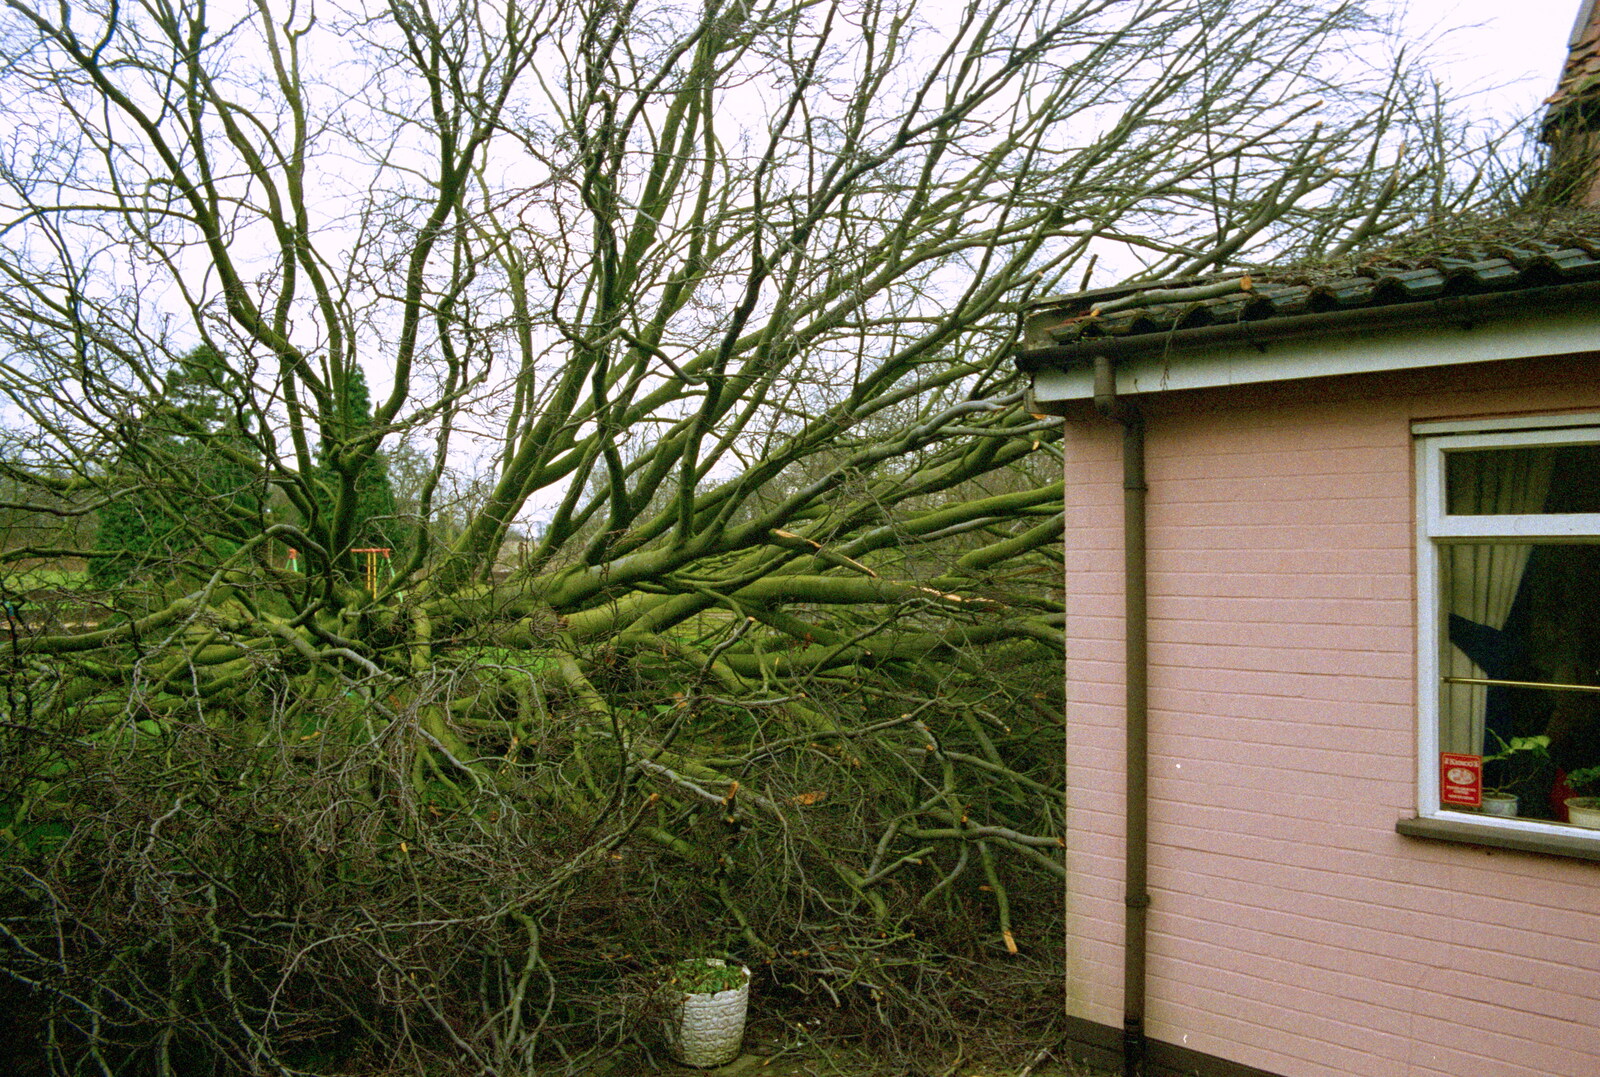 A Fallen Tree at The Swan, Brome, Suffolk - January 21st 2001: The tree behind the pub